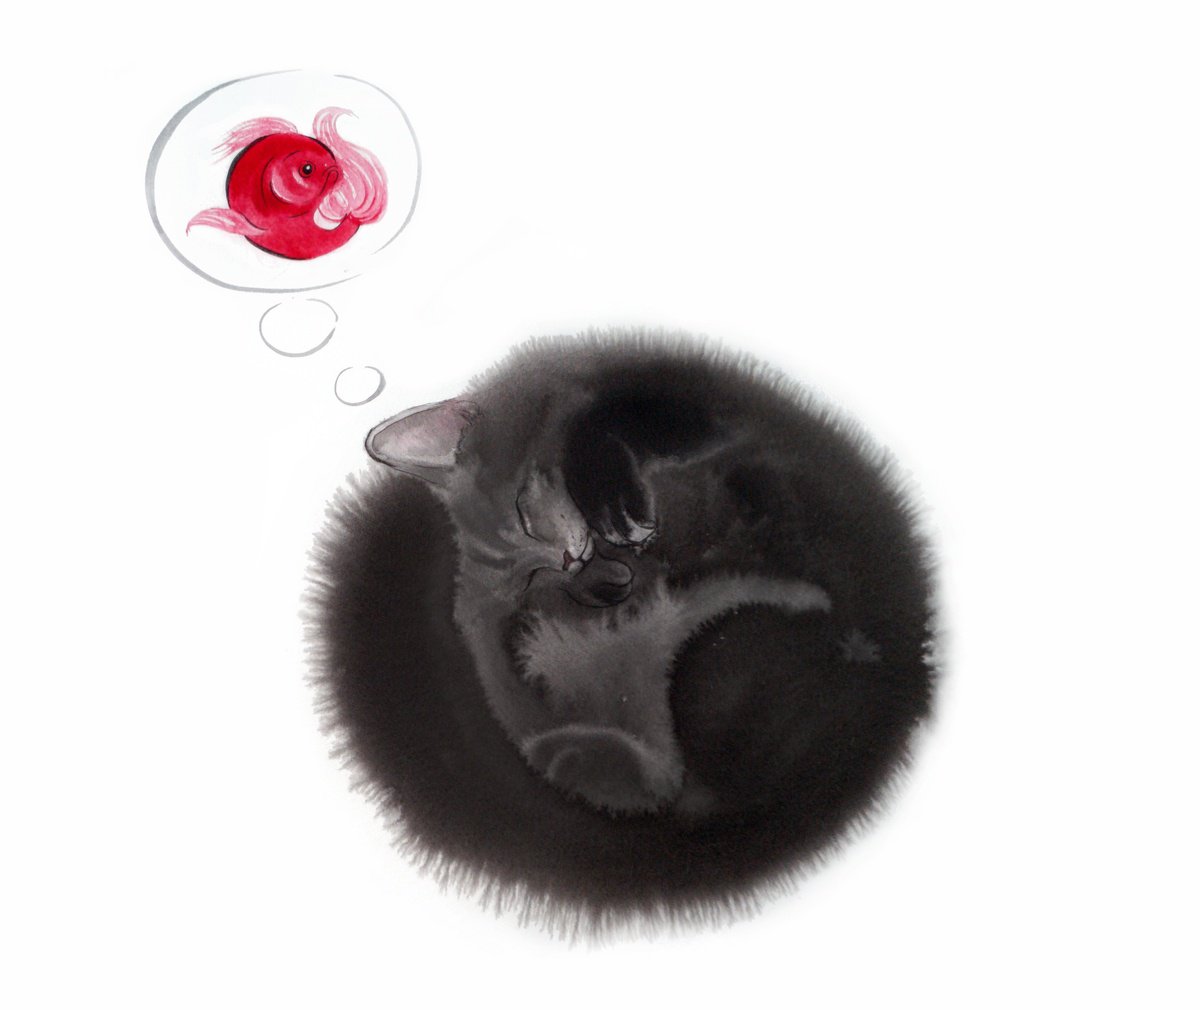 Sweet Dreams - Black cat curled up in a ball - dream about goldfish by Olga Beliaeva Watercolour